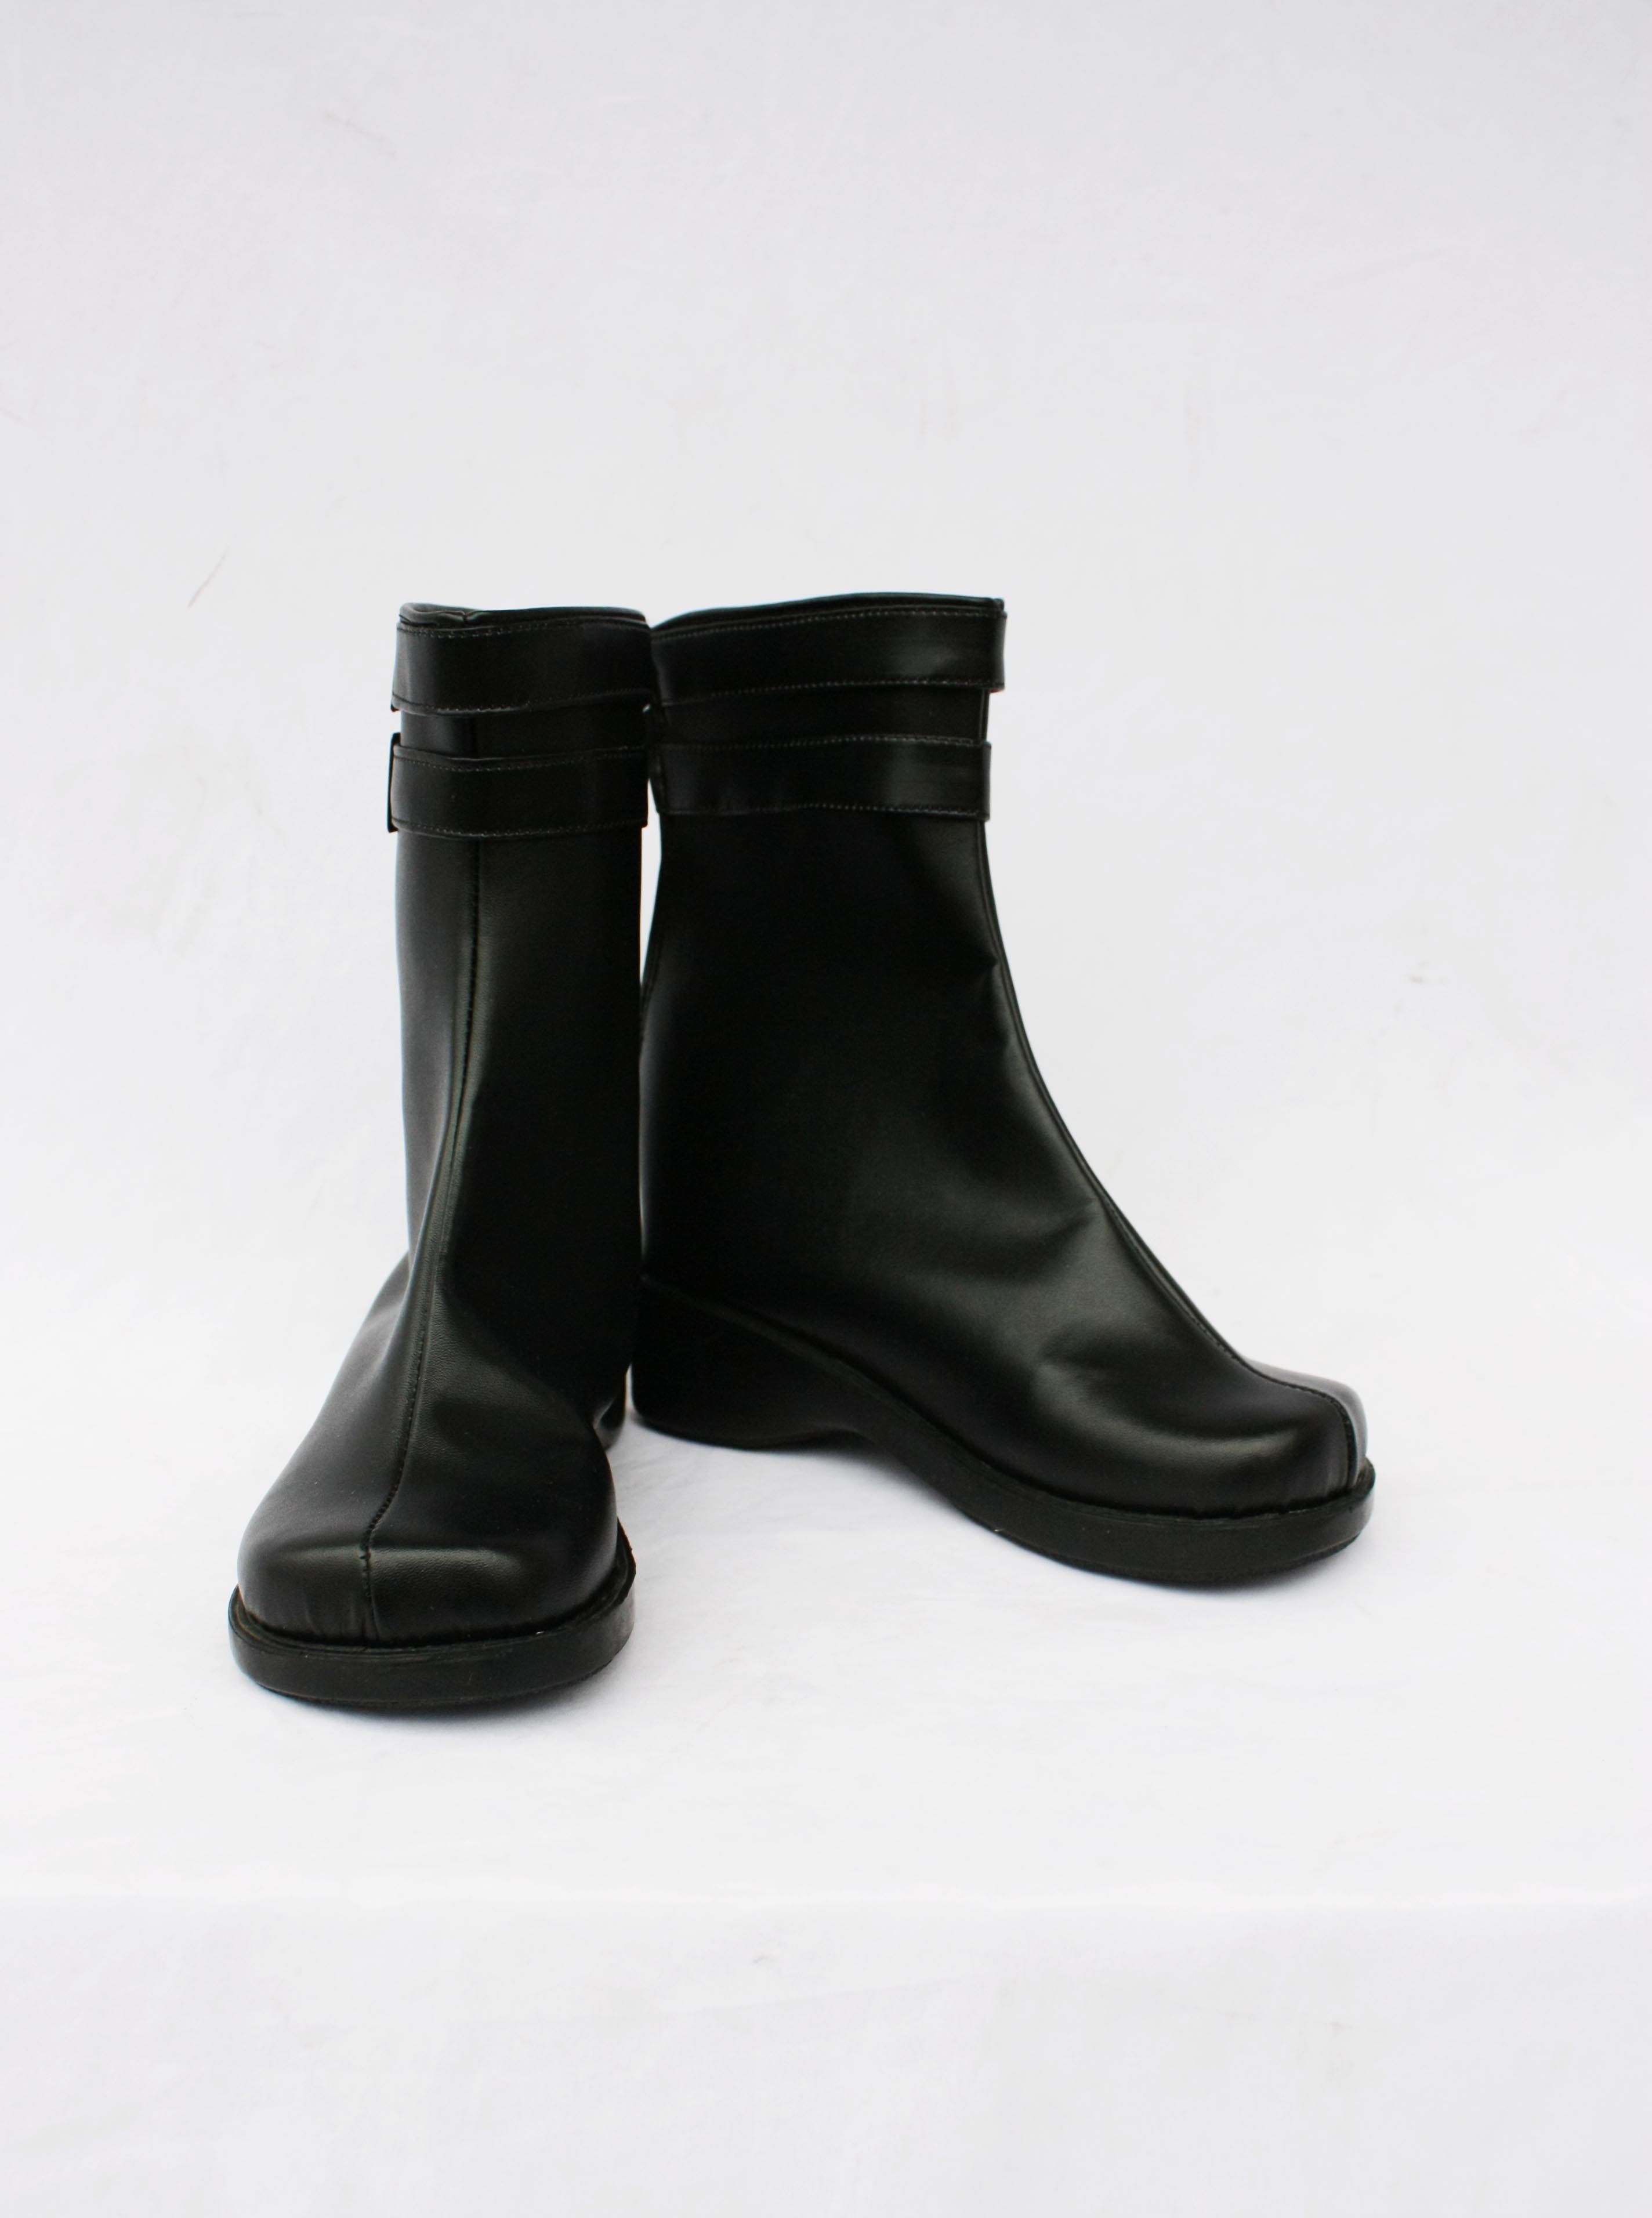 Reborn Superbia Squalo Cosplay Shoes